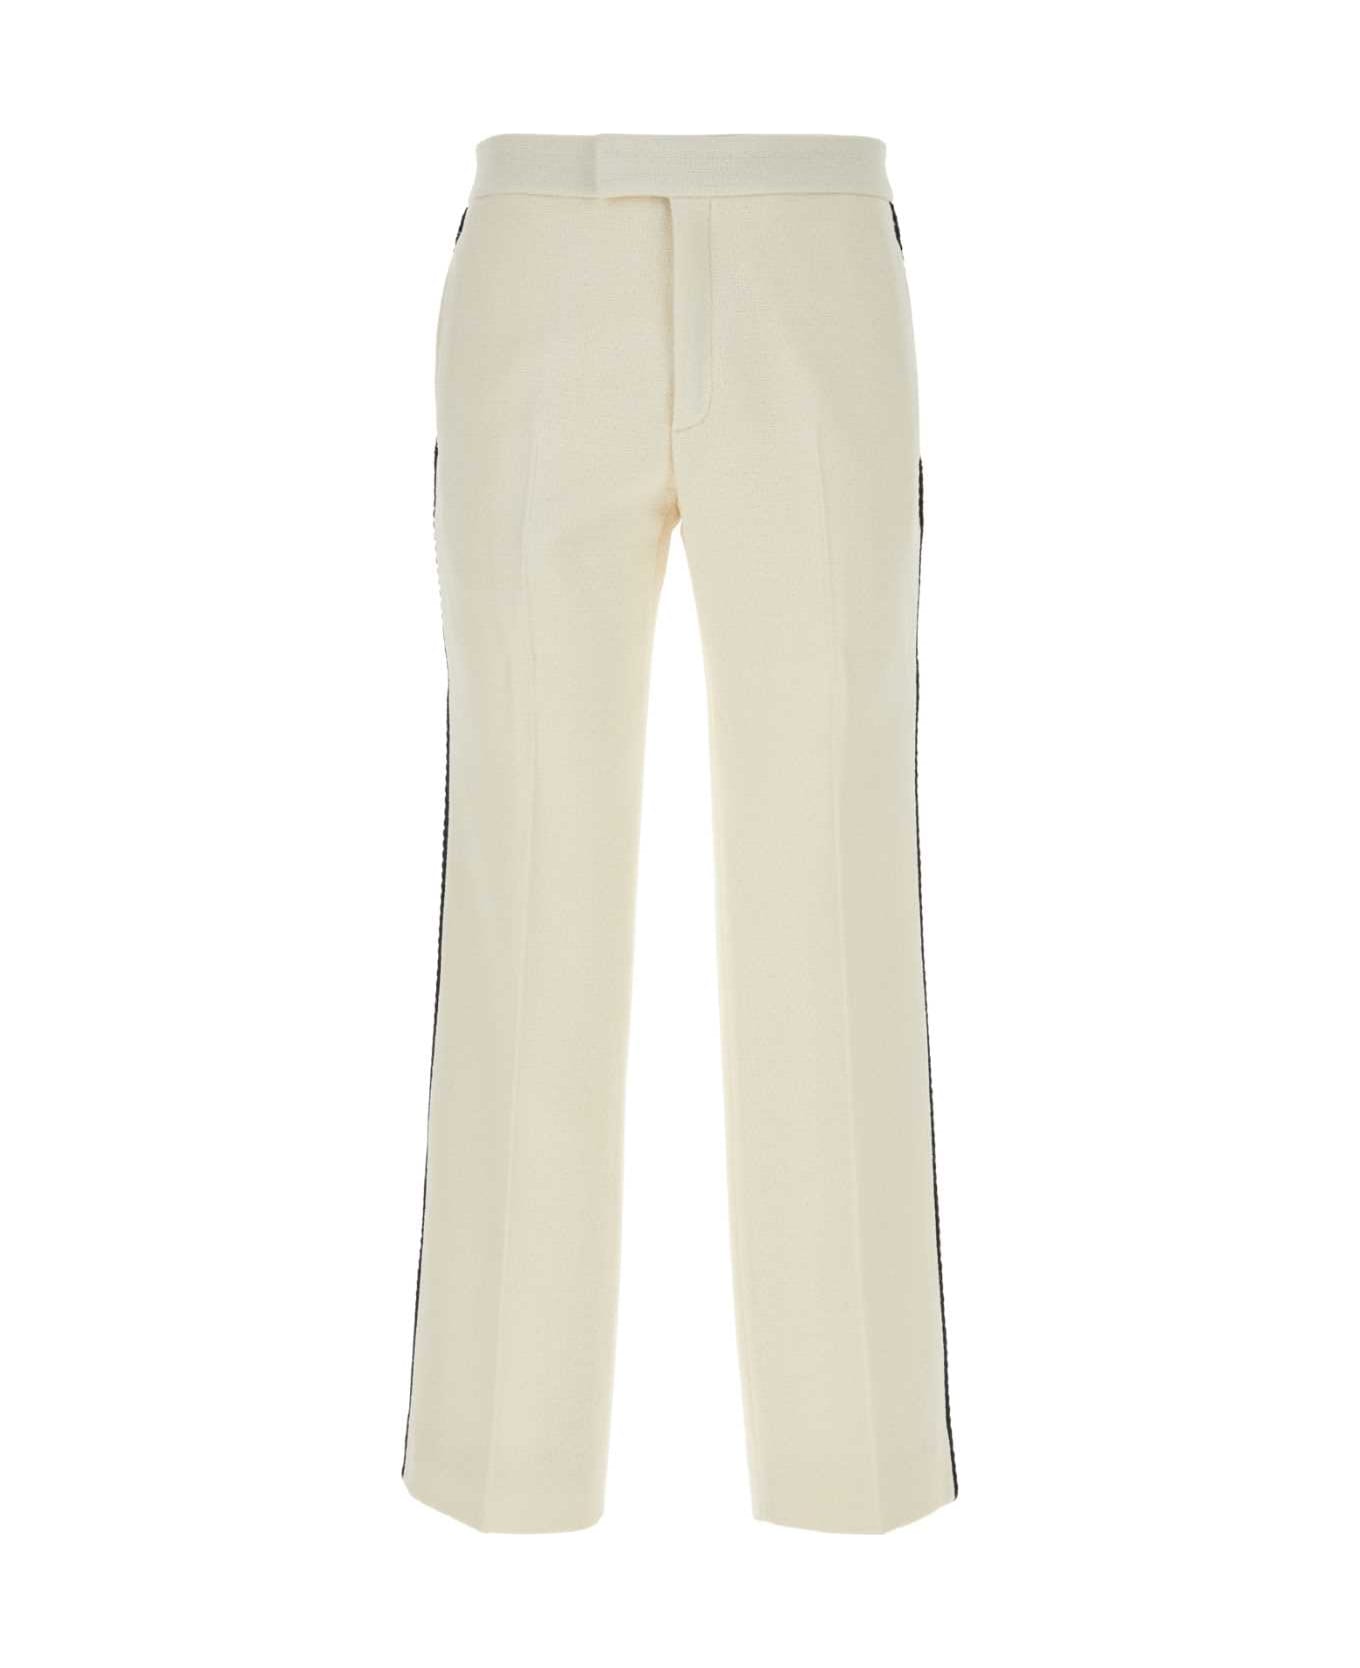 Gucci Ivory Tweed Pant - ALMOND FLOWER/MIX